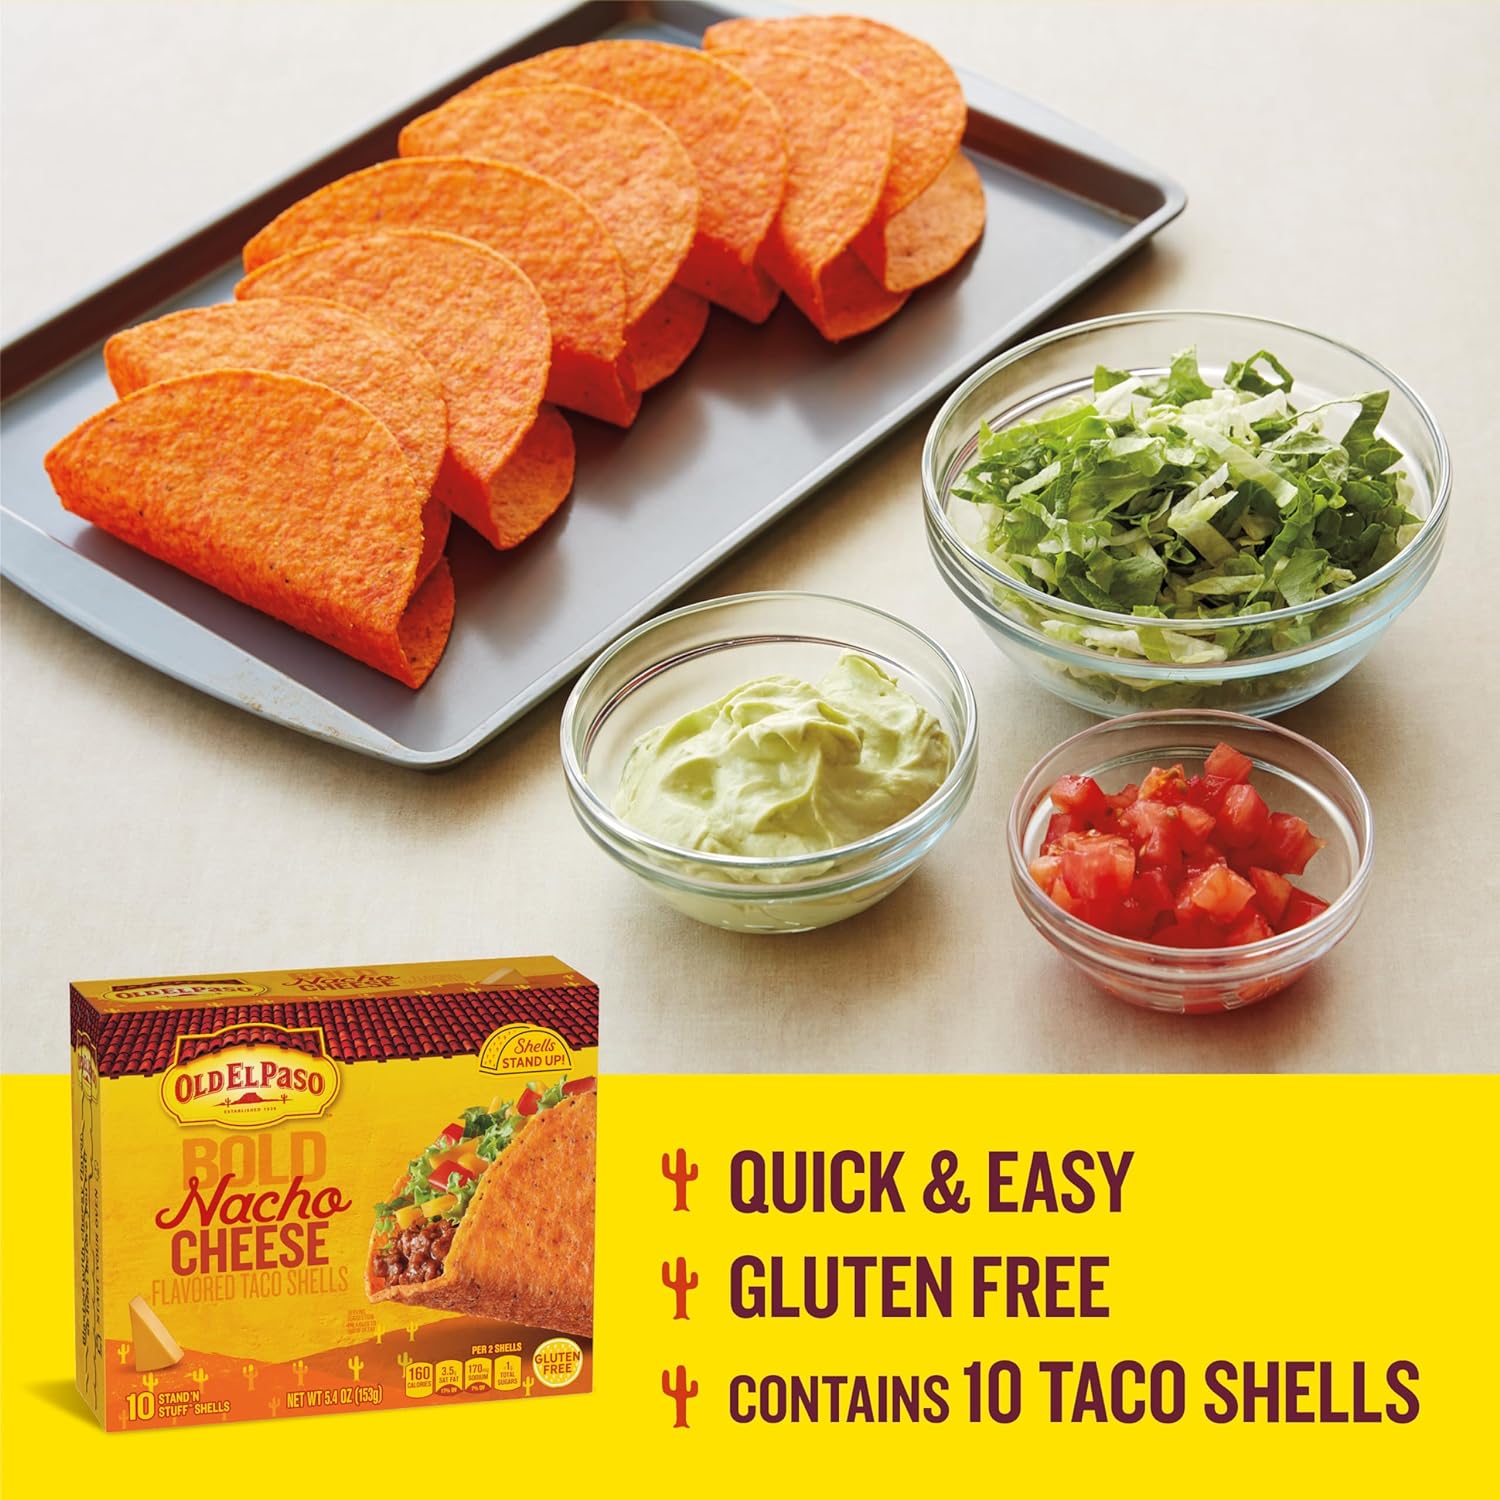 Old El Paso Stand 'N Stuff Bold Nacho Cheese Flavored Taco Shells, 10-count : Grocery & Gourmet Food